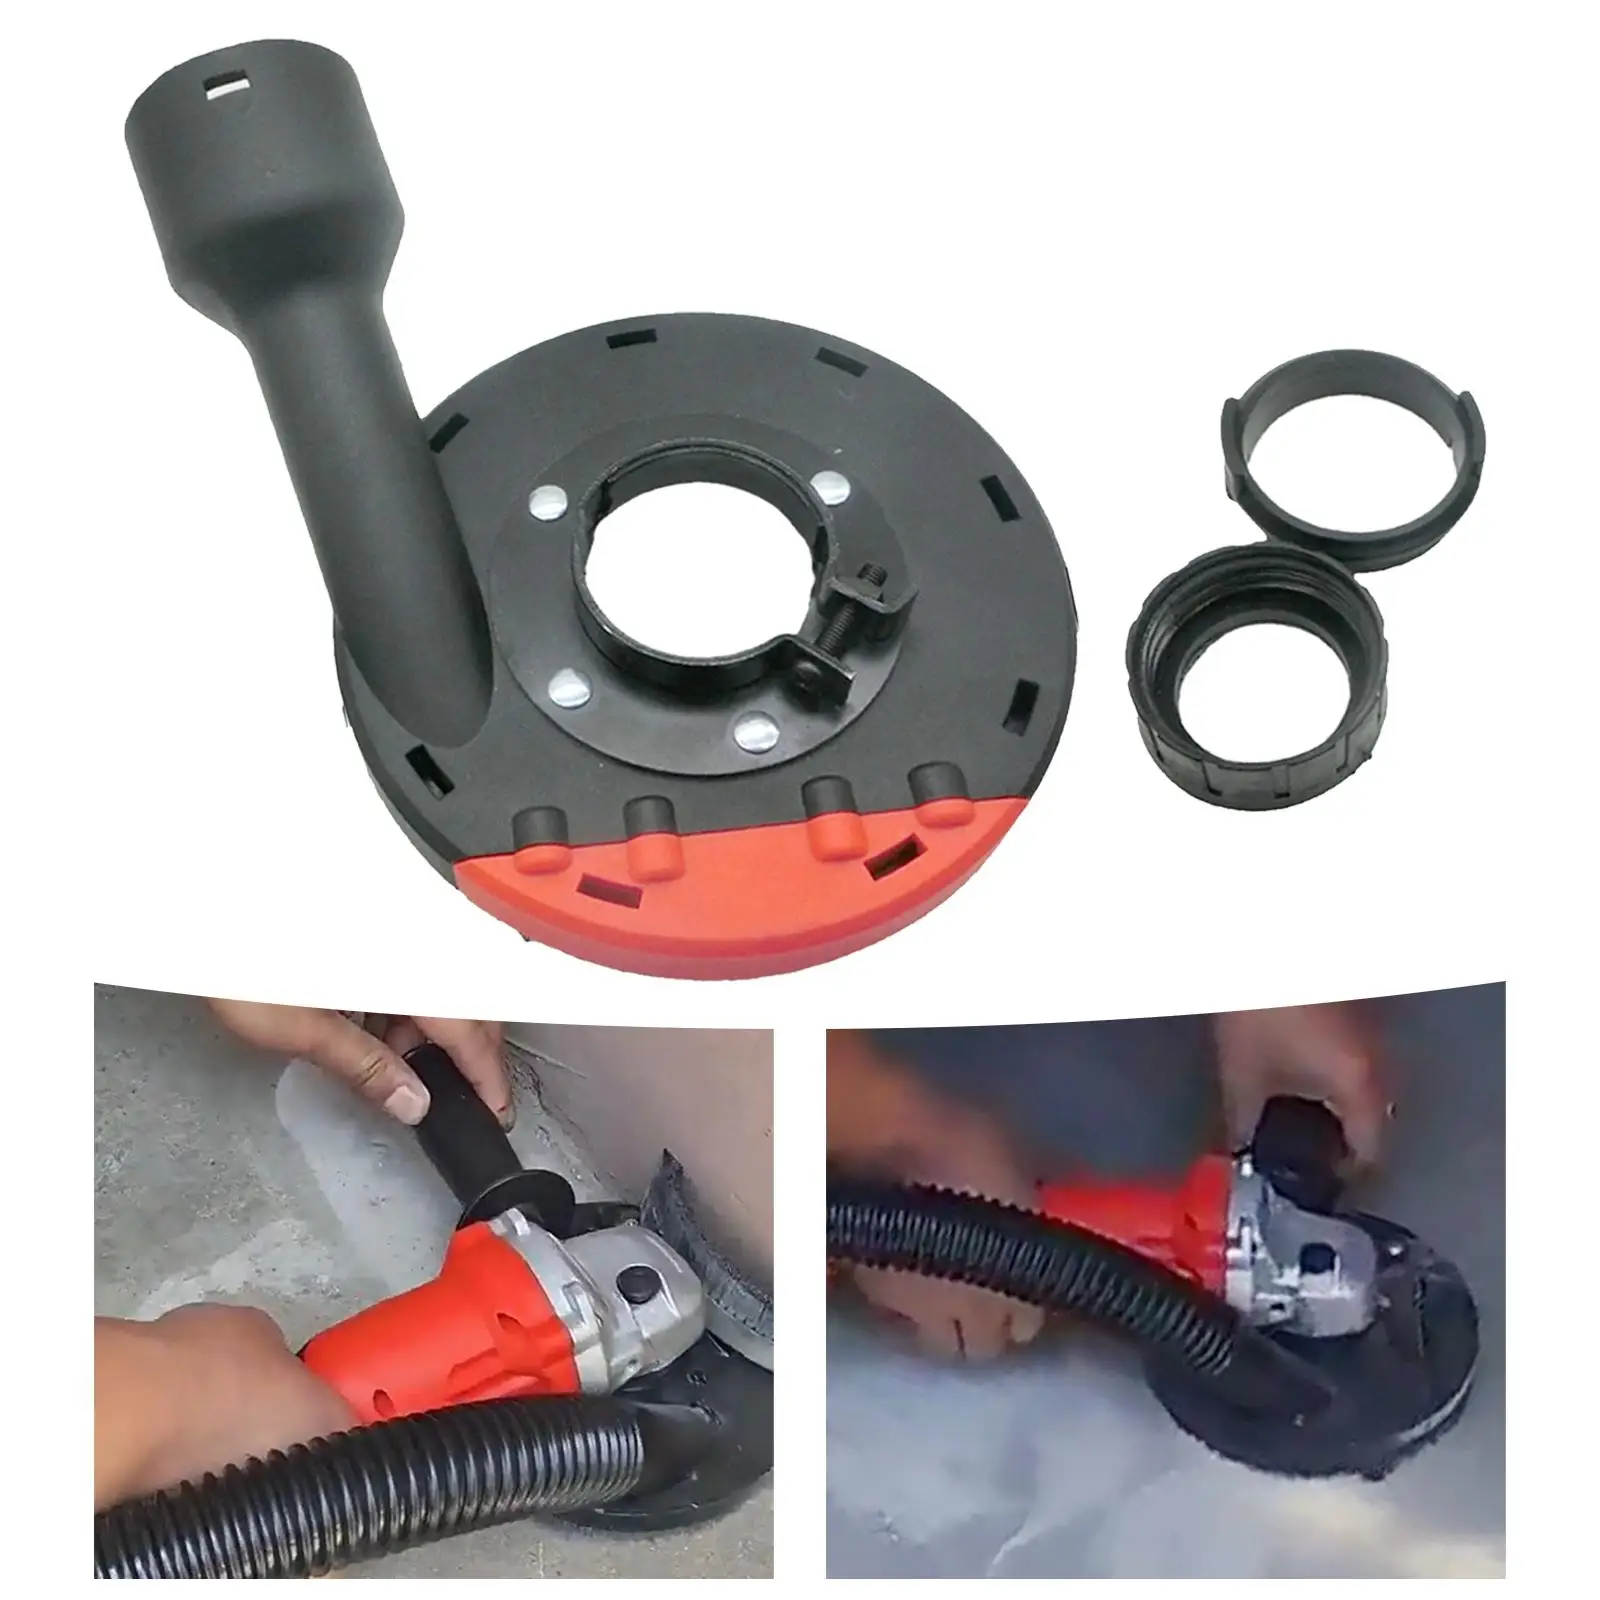 5.5 inch Grinder Dust Collector Grinder Attachments Expert Surface Grinding Dust Shroud for Concrete Stone Angle Grinder Granite